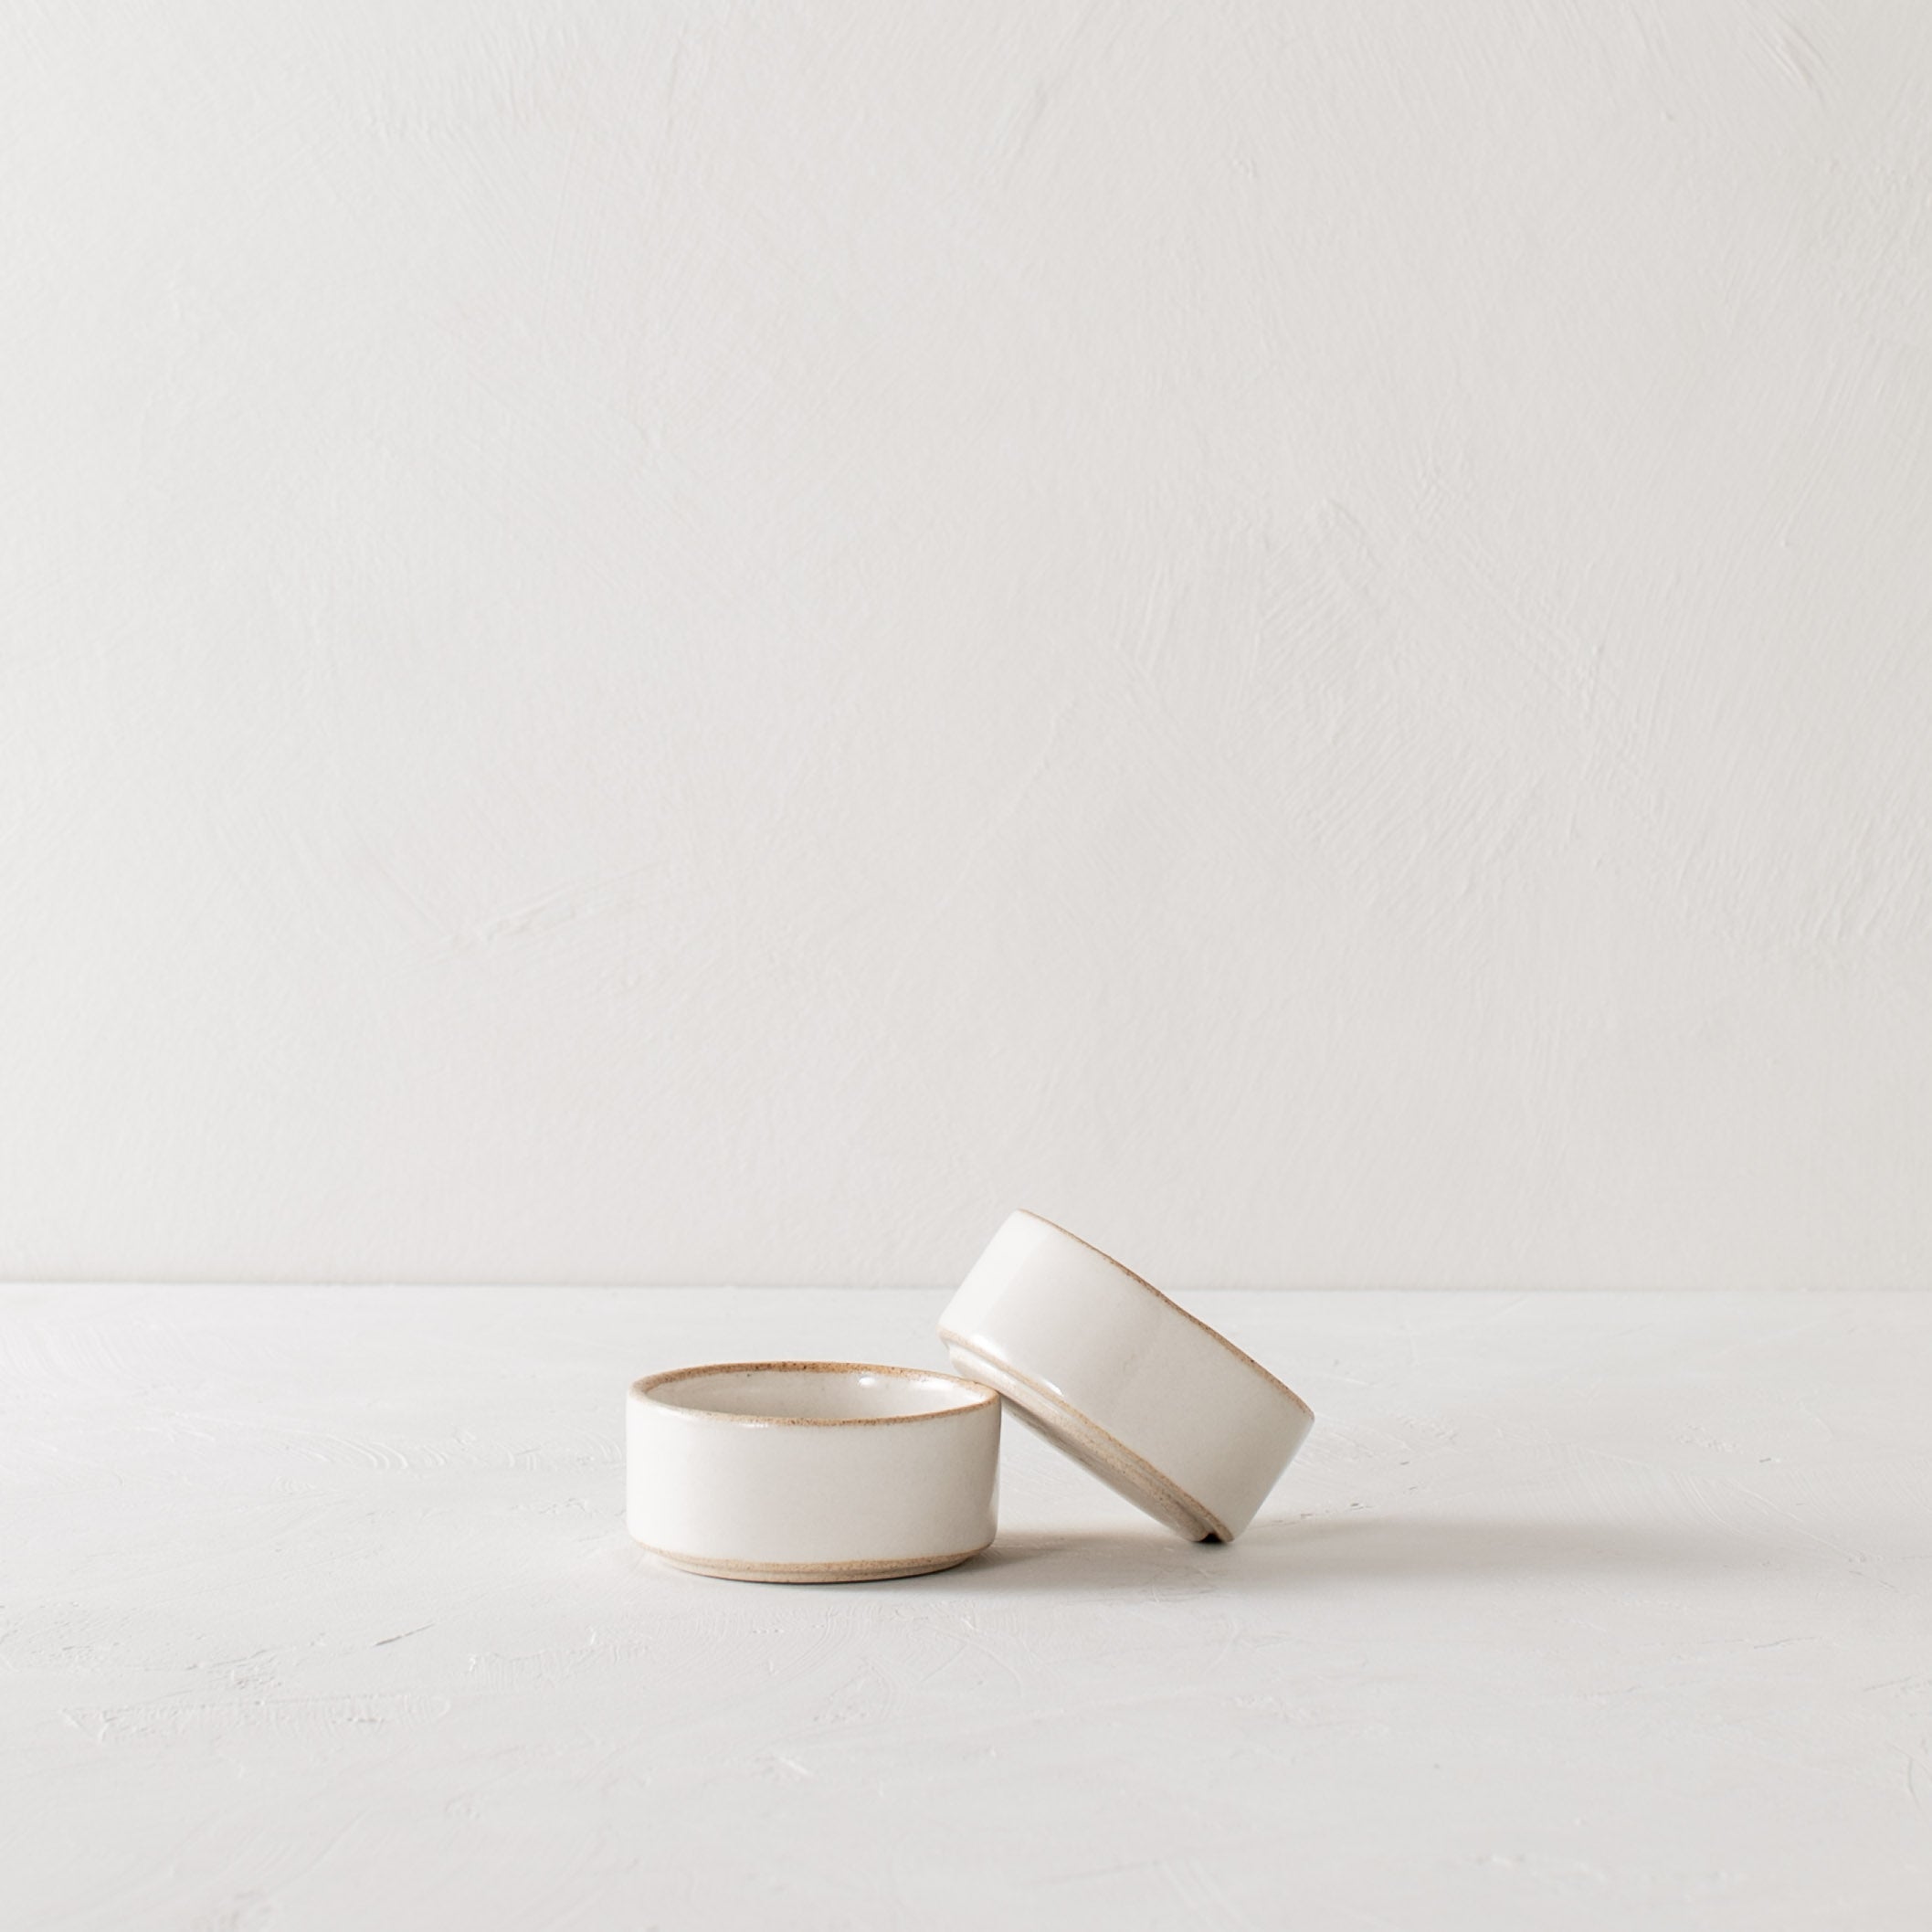 Pair of two white ceramic ramekins with exposed stoneware rims and bases. One ramekin leaning on the other. Handmade ceramic ramekins, designed and sold by Convivial Production, Kansas City ceramics.   